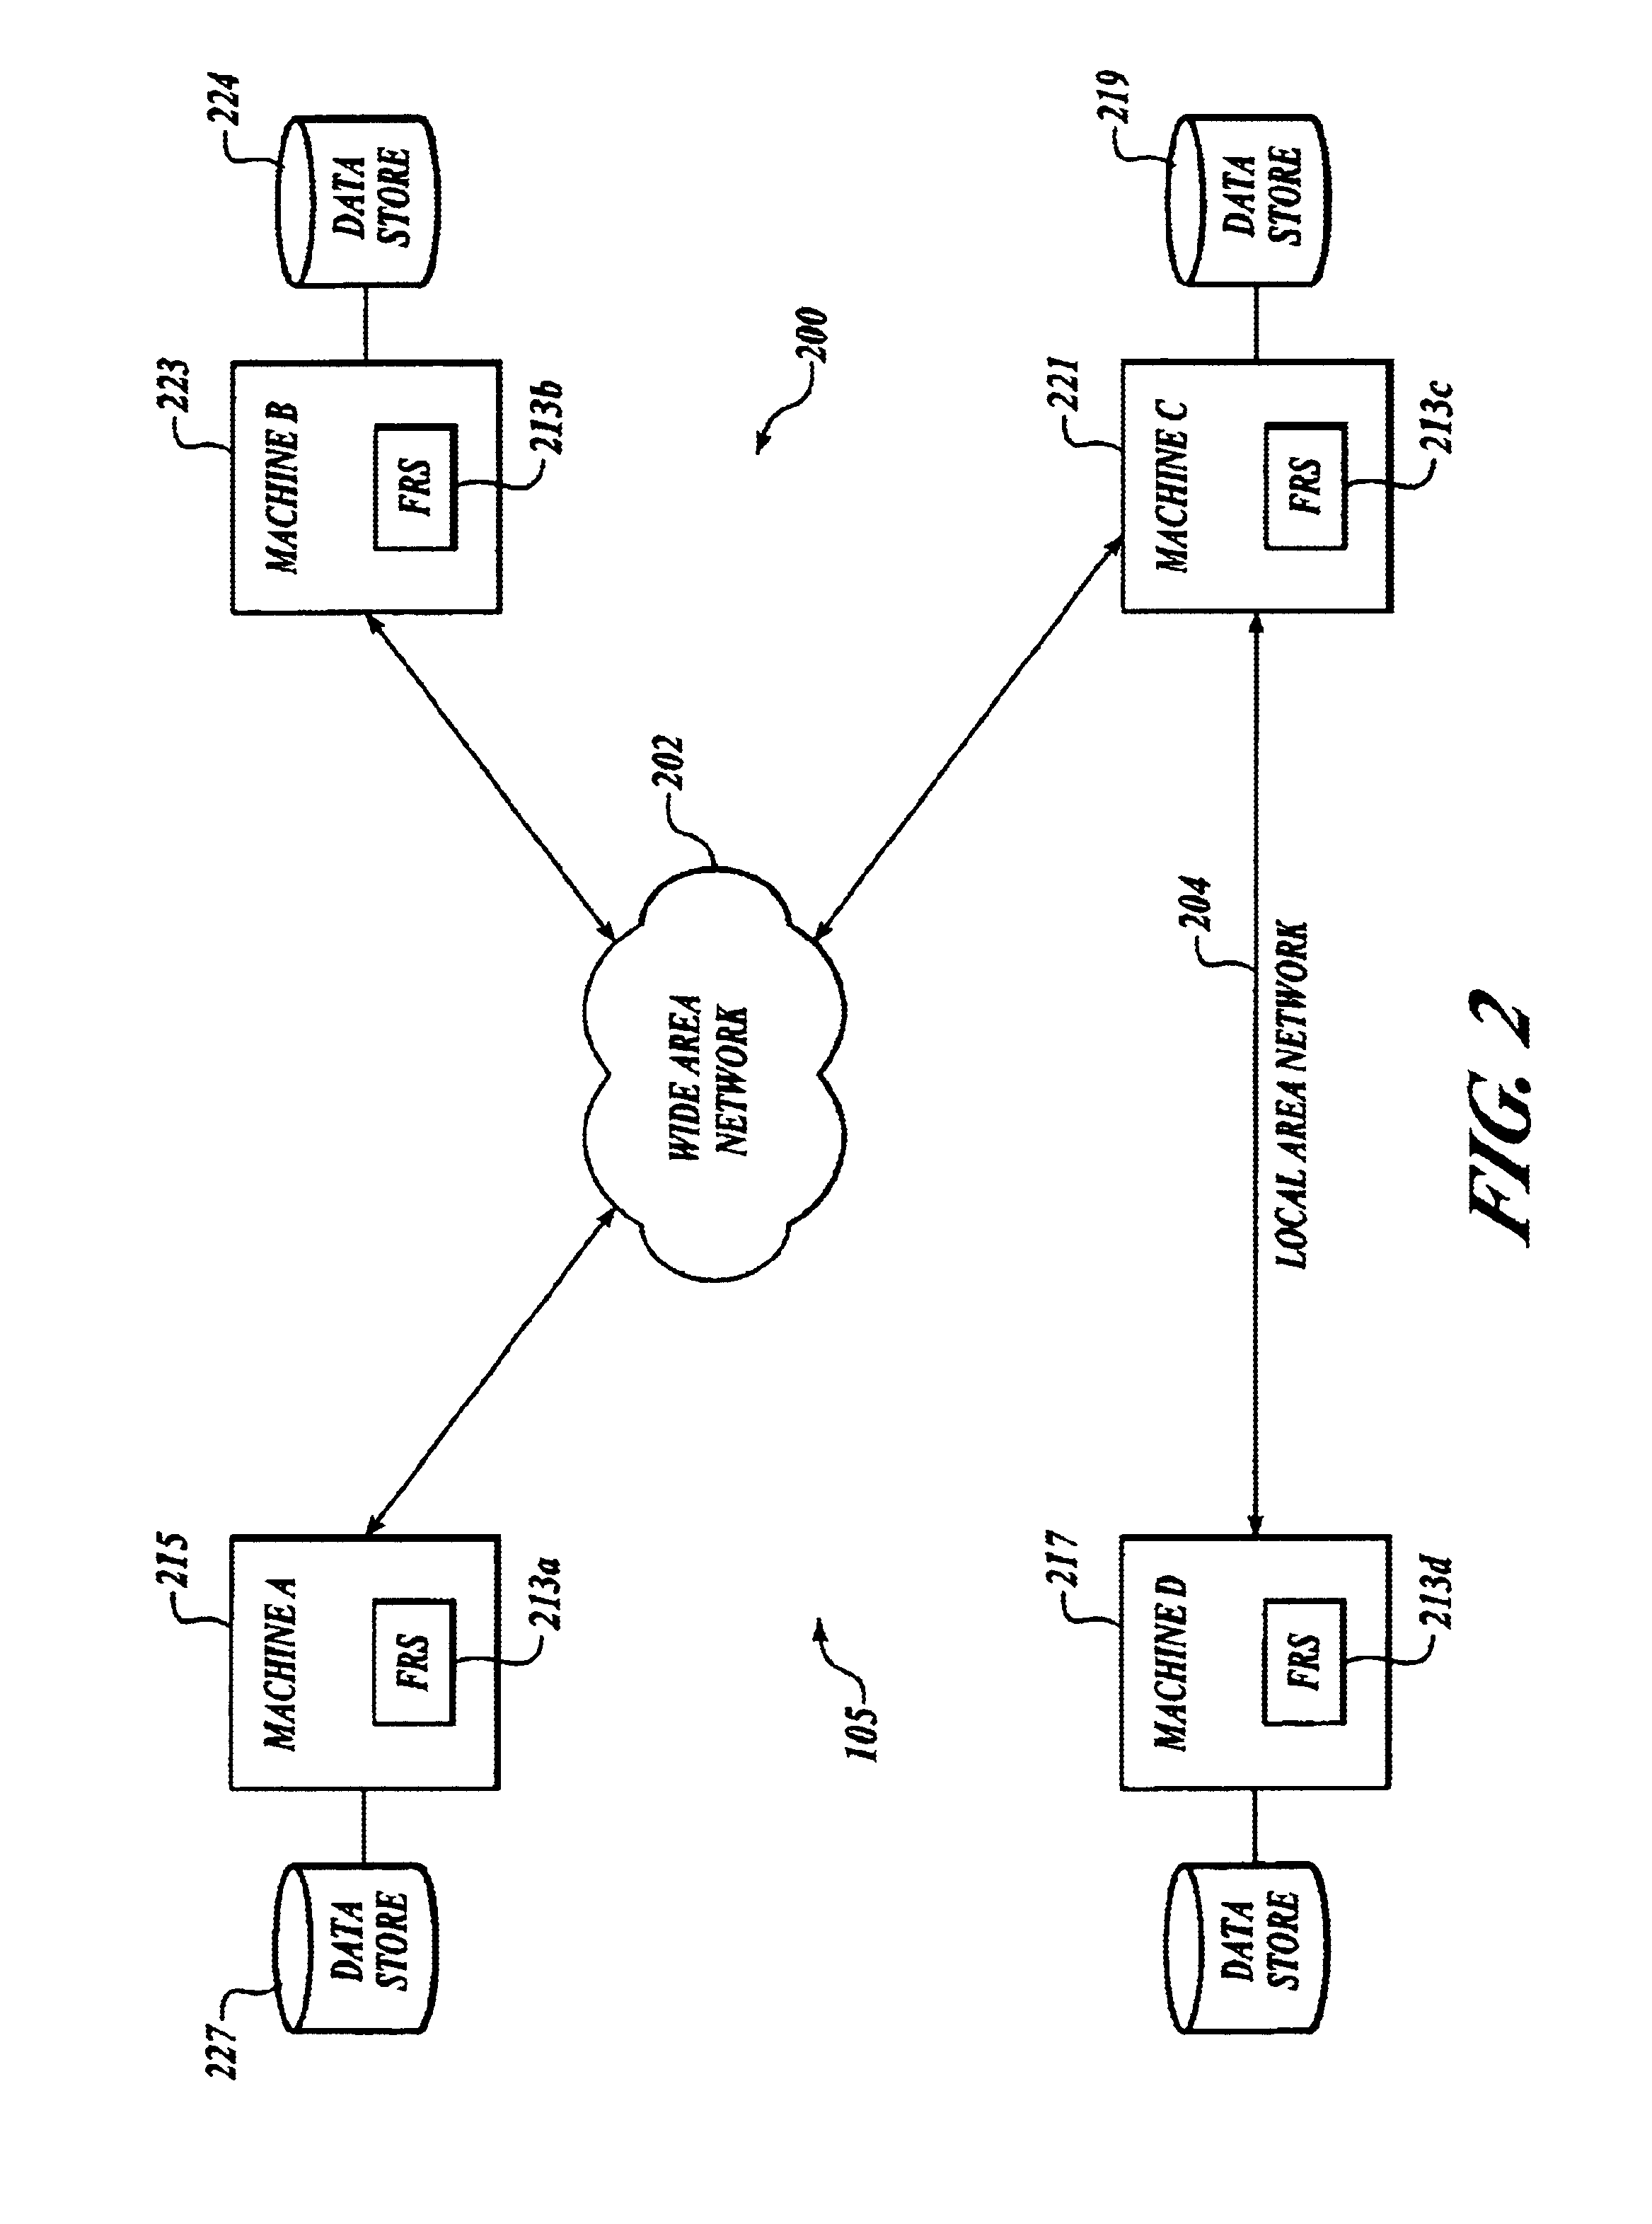 System and method for replicating data in resource sets